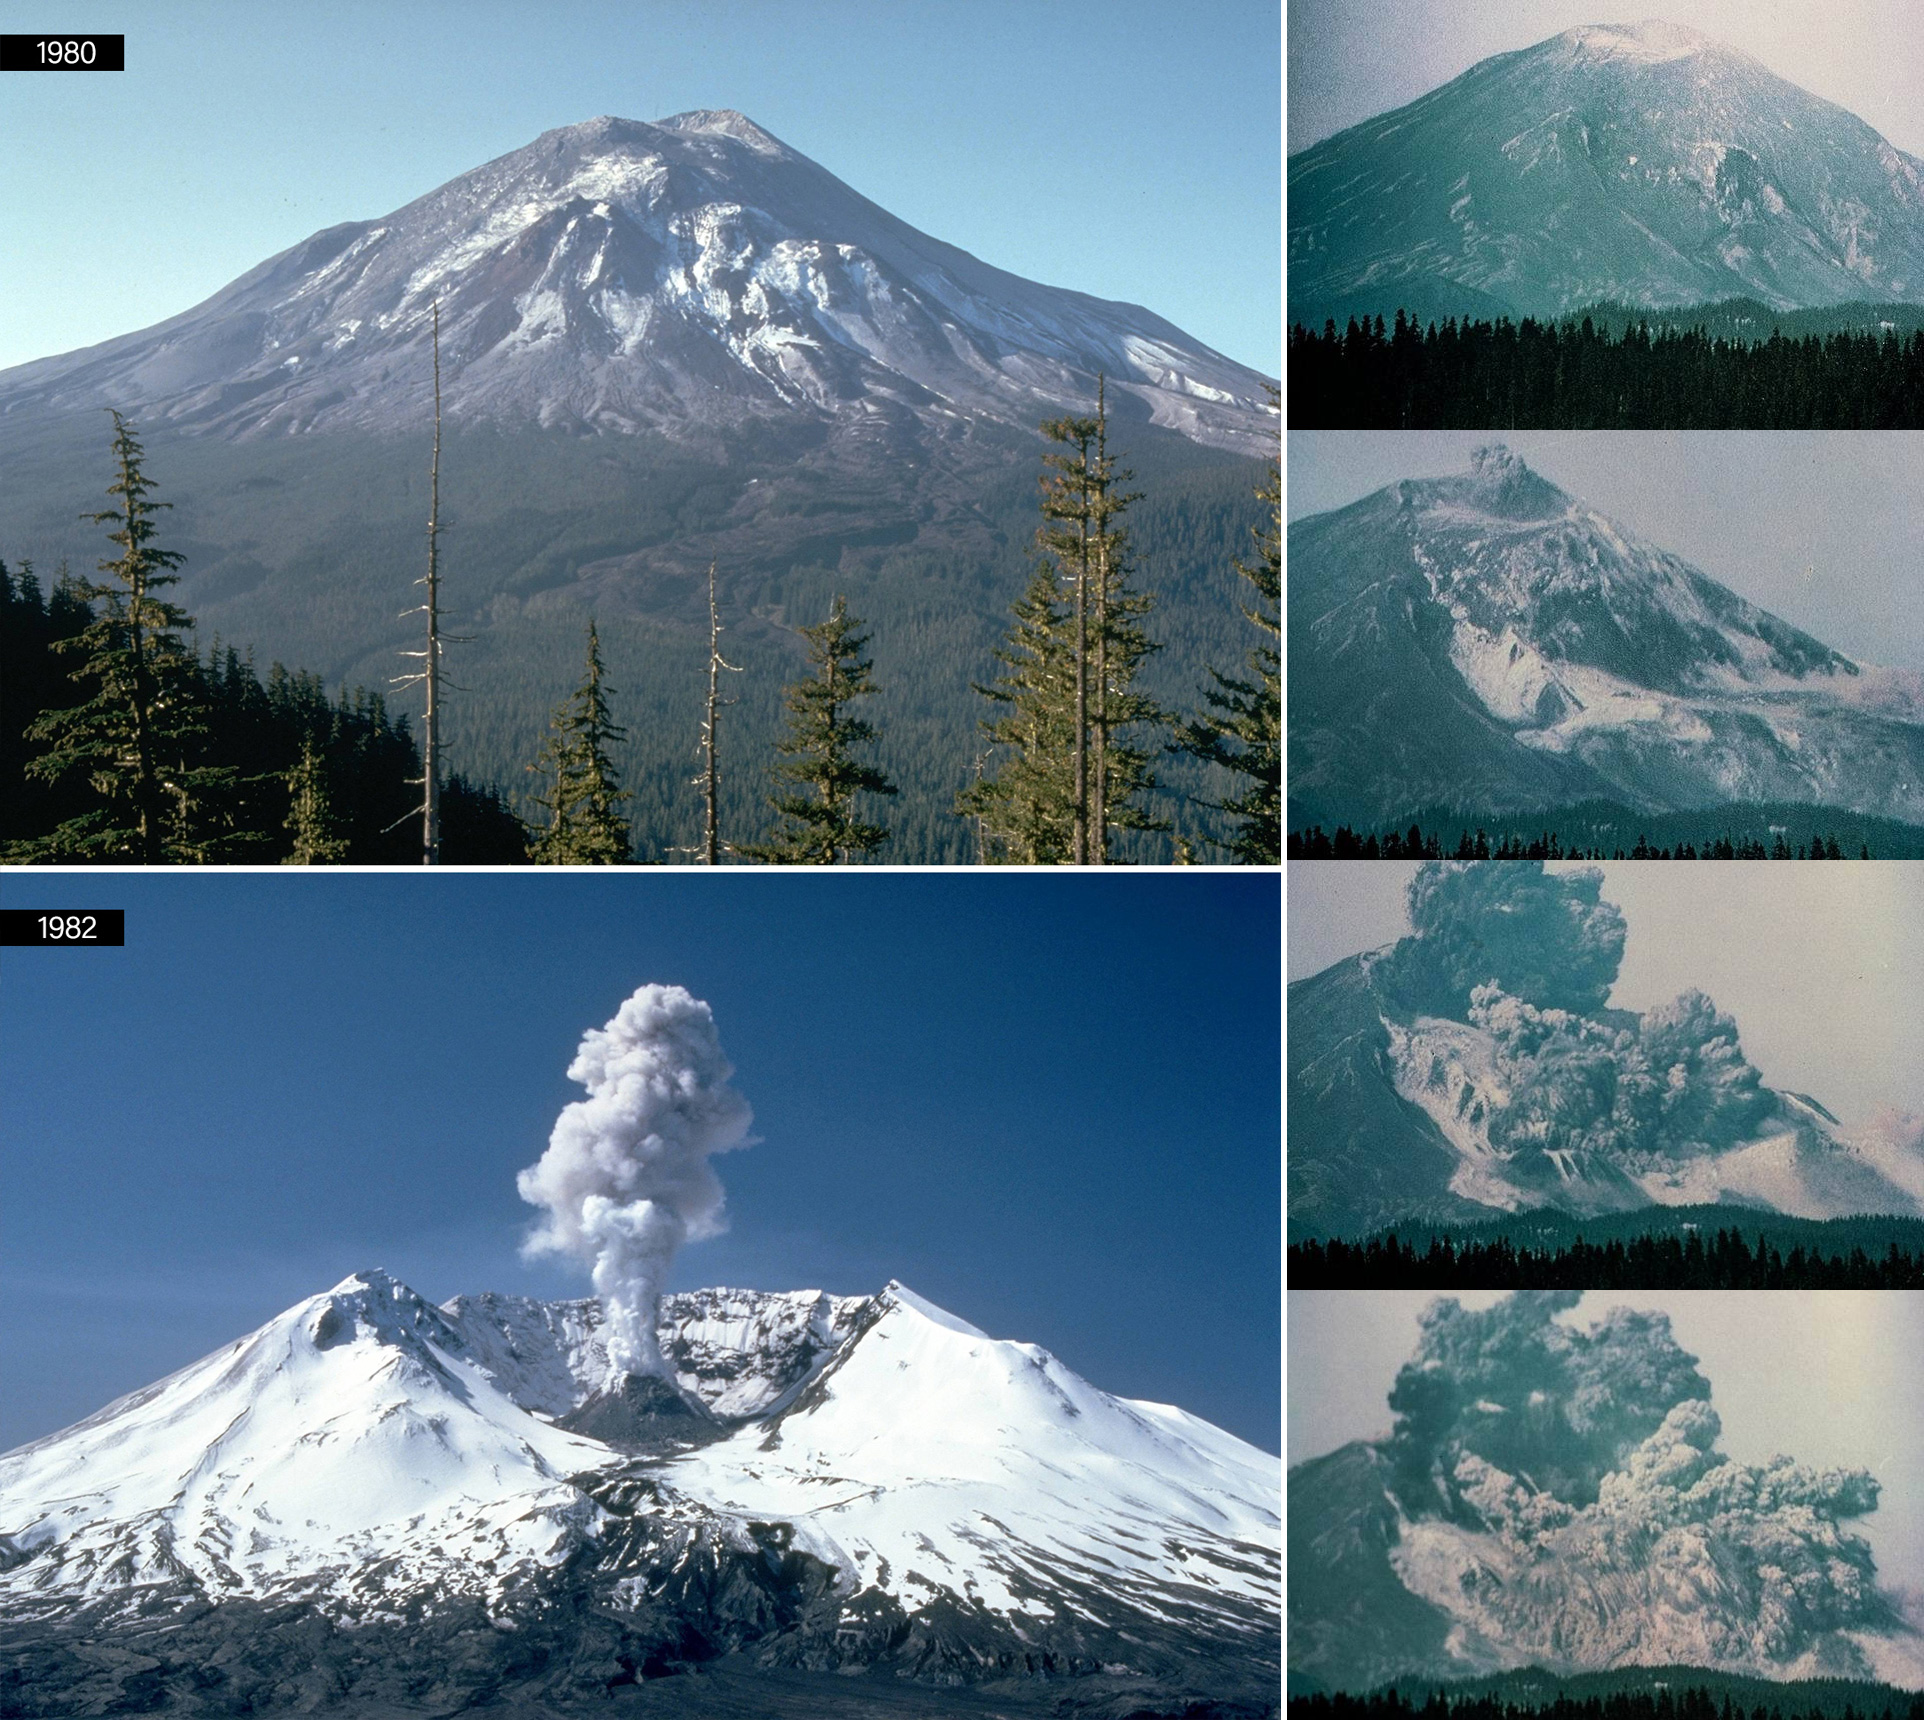 Mount St. Helens before and after the 1980 eruption. Amateur photographer Gary Rosenquist captured the eruption sequence.